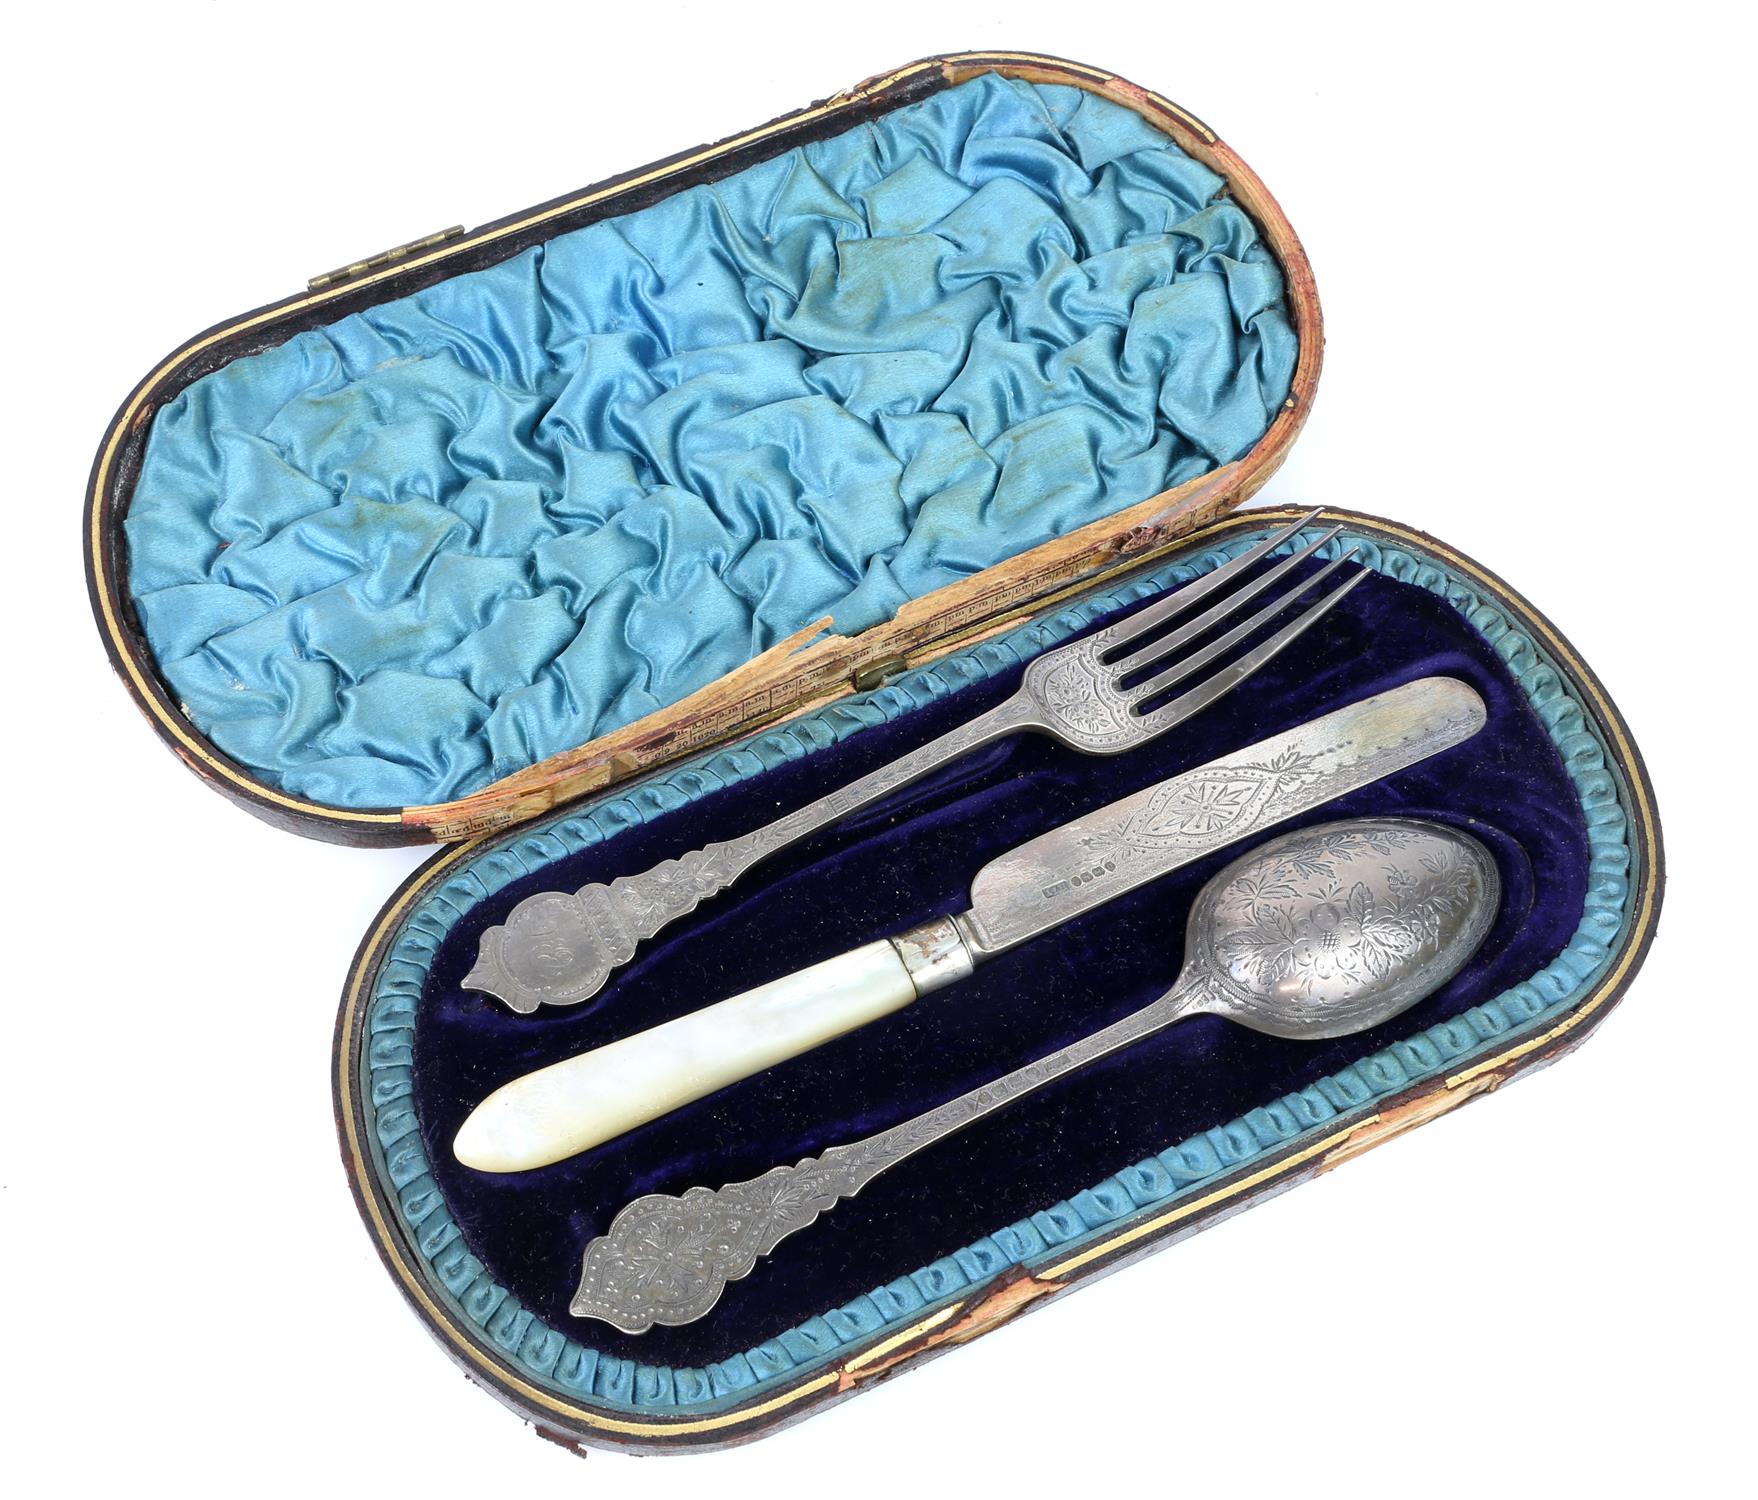 Cased Brightcut Silver 3 piece christening set with floral and fauna design by Hilliard and